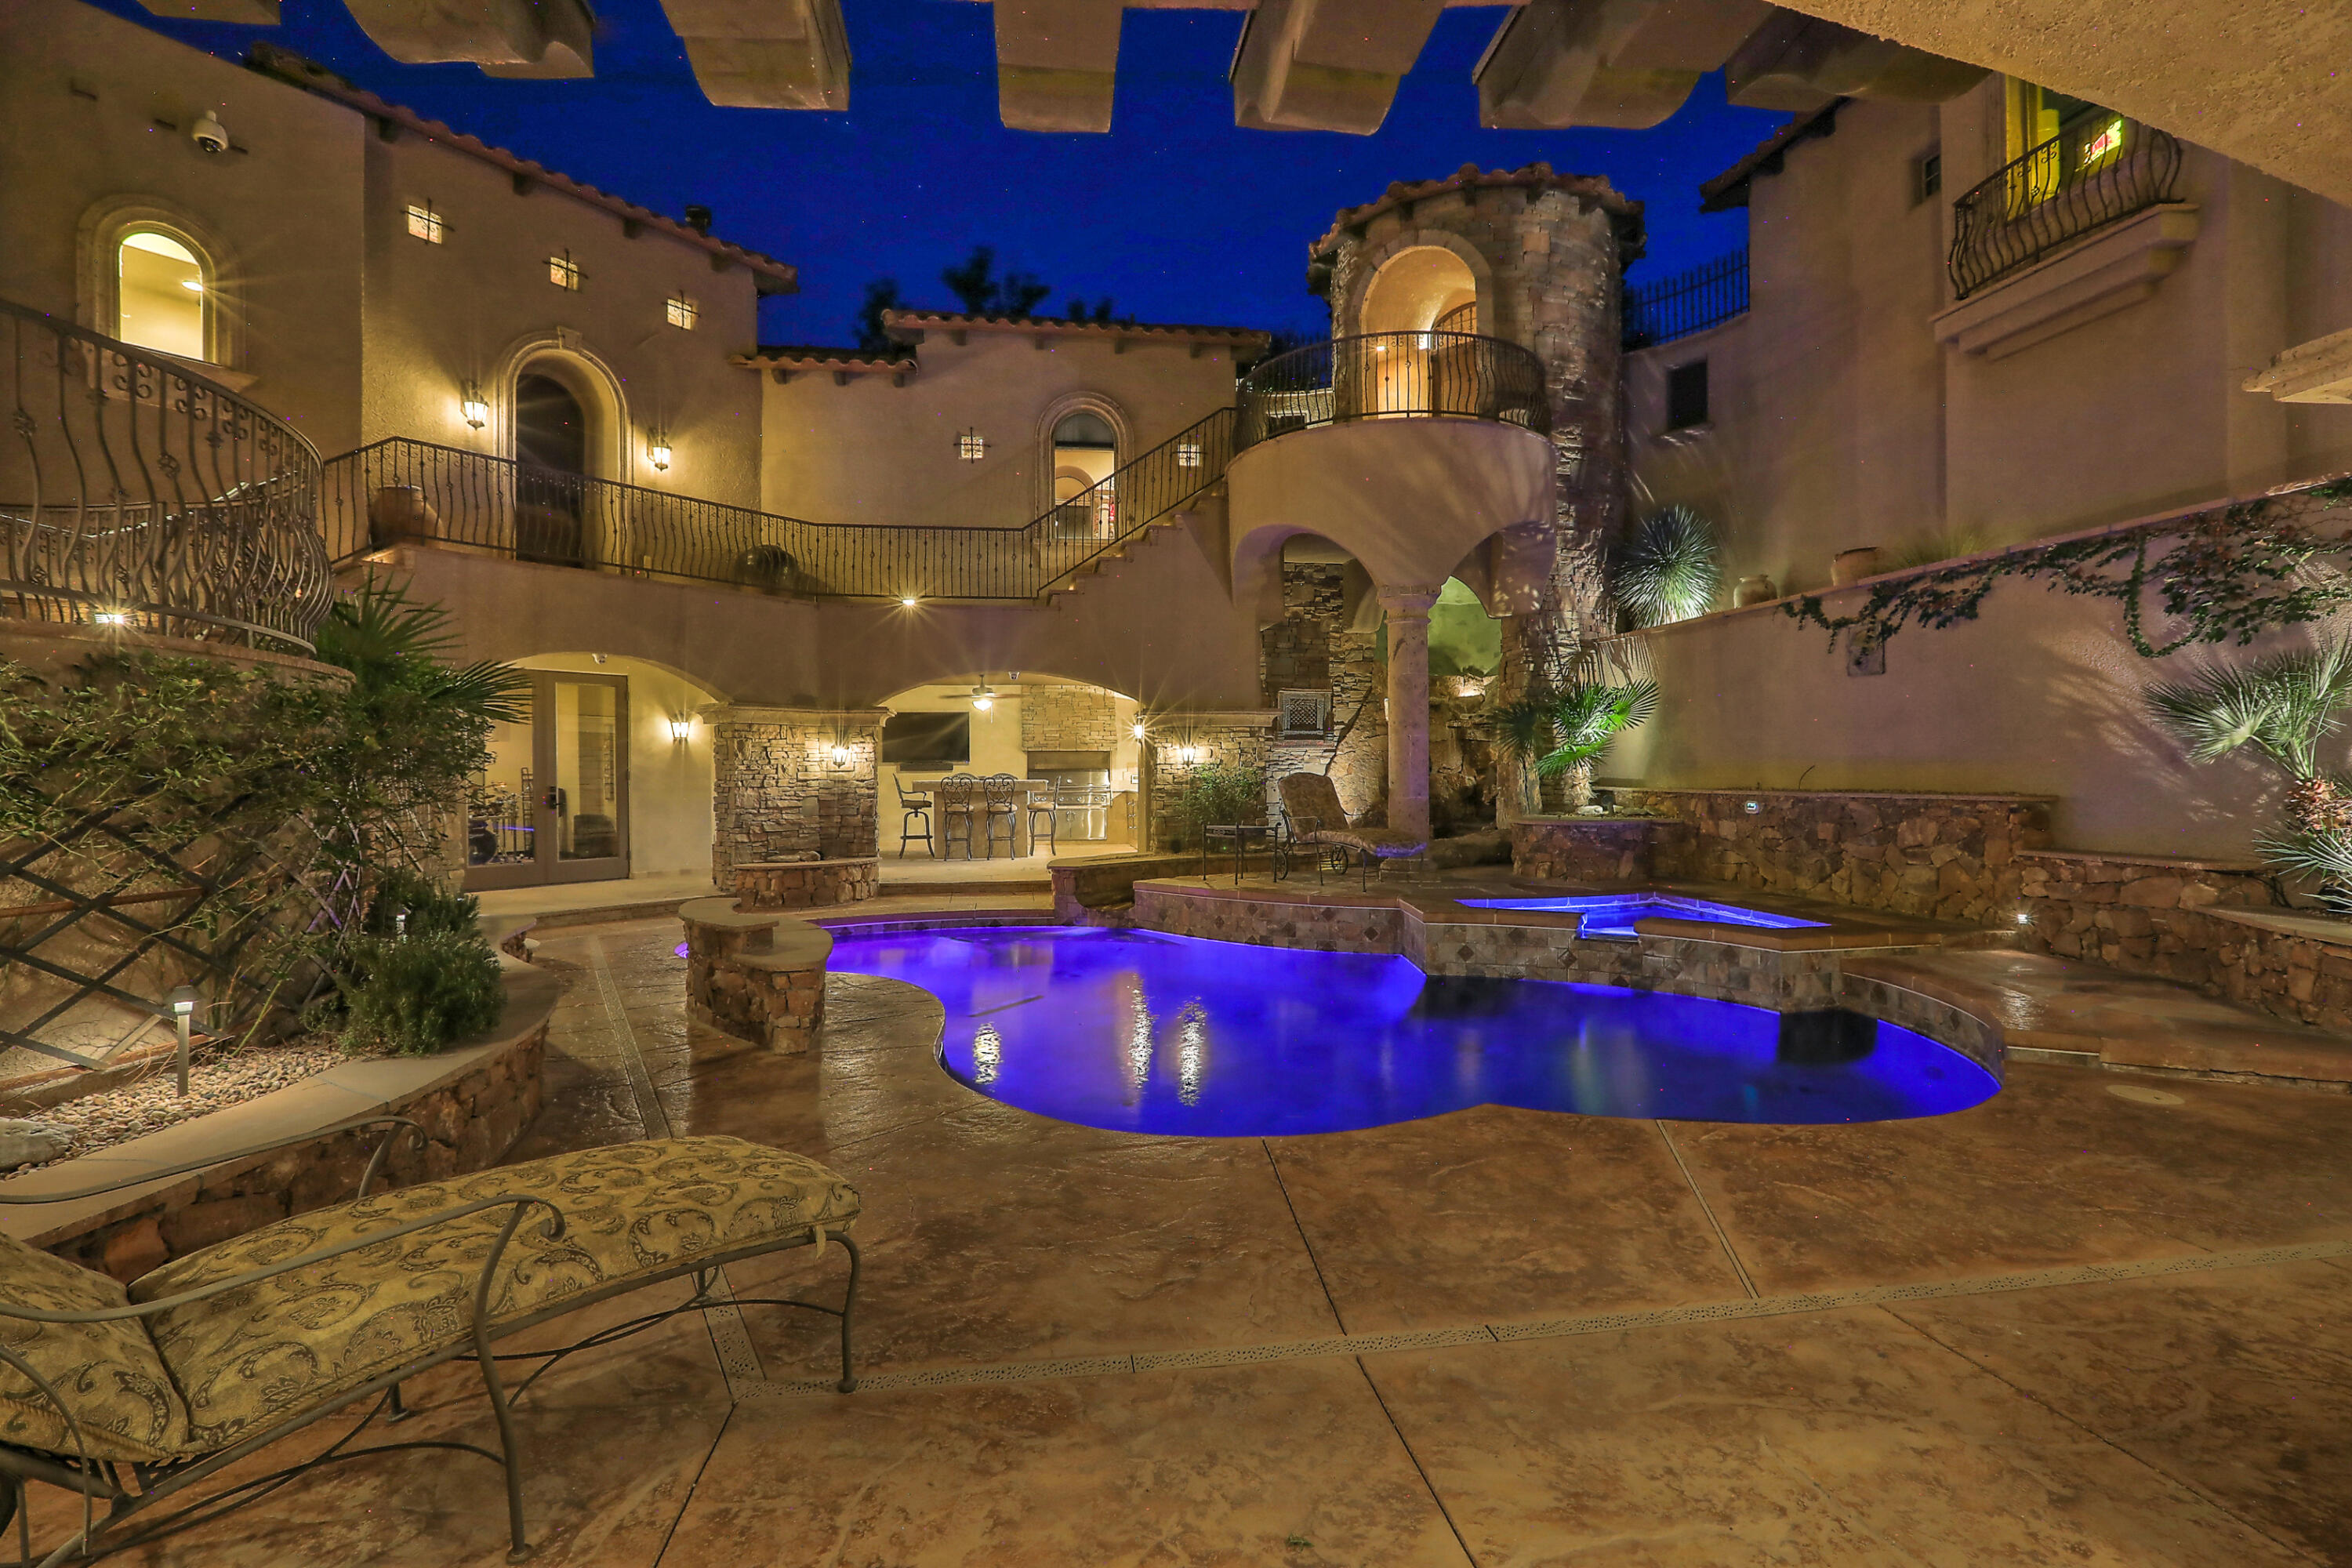 Stunning Tuscan villa a stone's throw from the Rio Grande, fine dining & recreation. Over 7,000 square feet of luxury w/every amenity & convenience included. From the marble floors to the mosaic tiled & wood beam ceiling, this home is your retreat. The gourmet chef's kitchen boasts top-of-the-line appliances, pot filler, custom tile, dual sinks, breakfast nook w/a breathtaking view, & enough space to entertain the whole neighborhood. Pool features stone waterfall, custom lighting for night swims & a wraparound balcony & terrace to enjoy every vista. Multiple covered lounge & dining spaces, hobbyist's dream garage, workout room, media & game room & spa bathrooms. Too many one-of-a-kind luxuries to list. If a private resort is what you're after, you can't miss this beautiful palazzo!